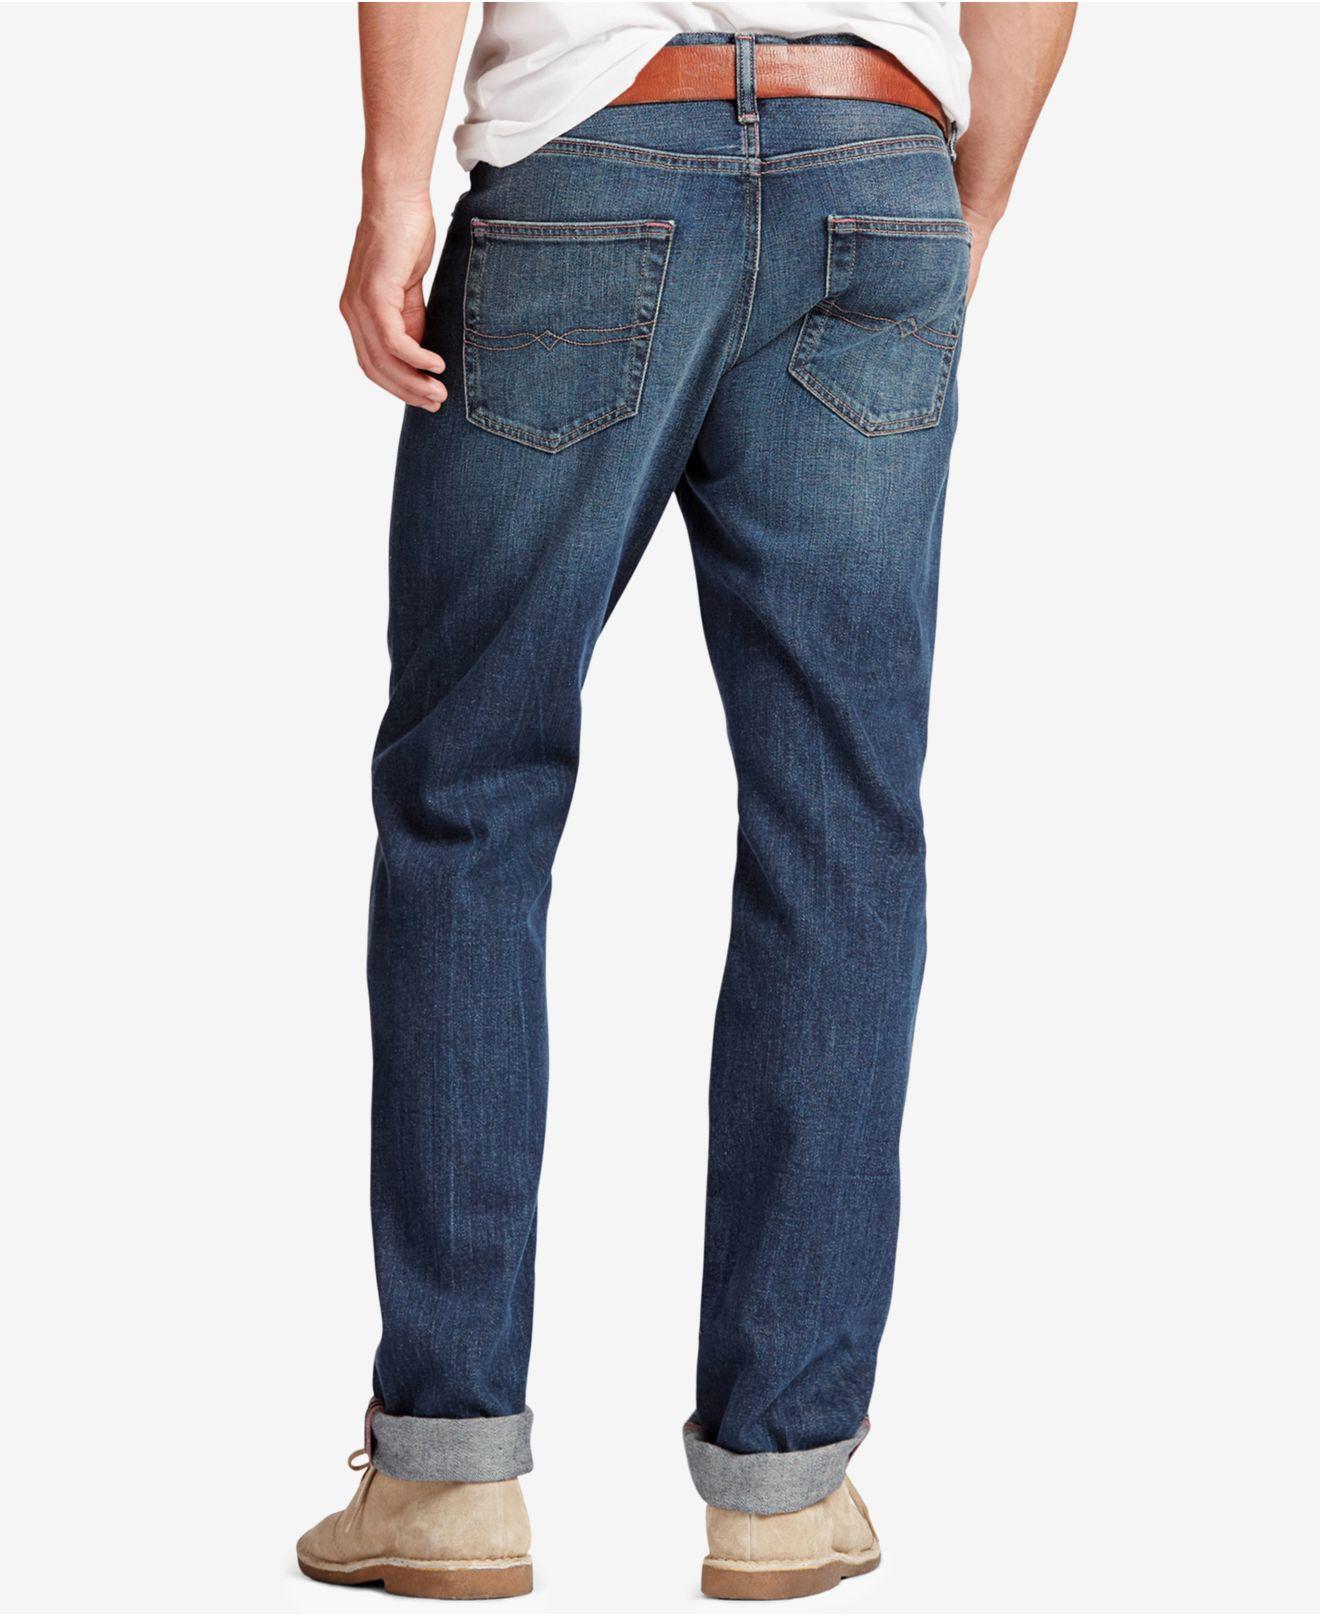 Lucky Brand Denim Men's Athletic Fit Jeans in Blue for Men - Save 65% ...